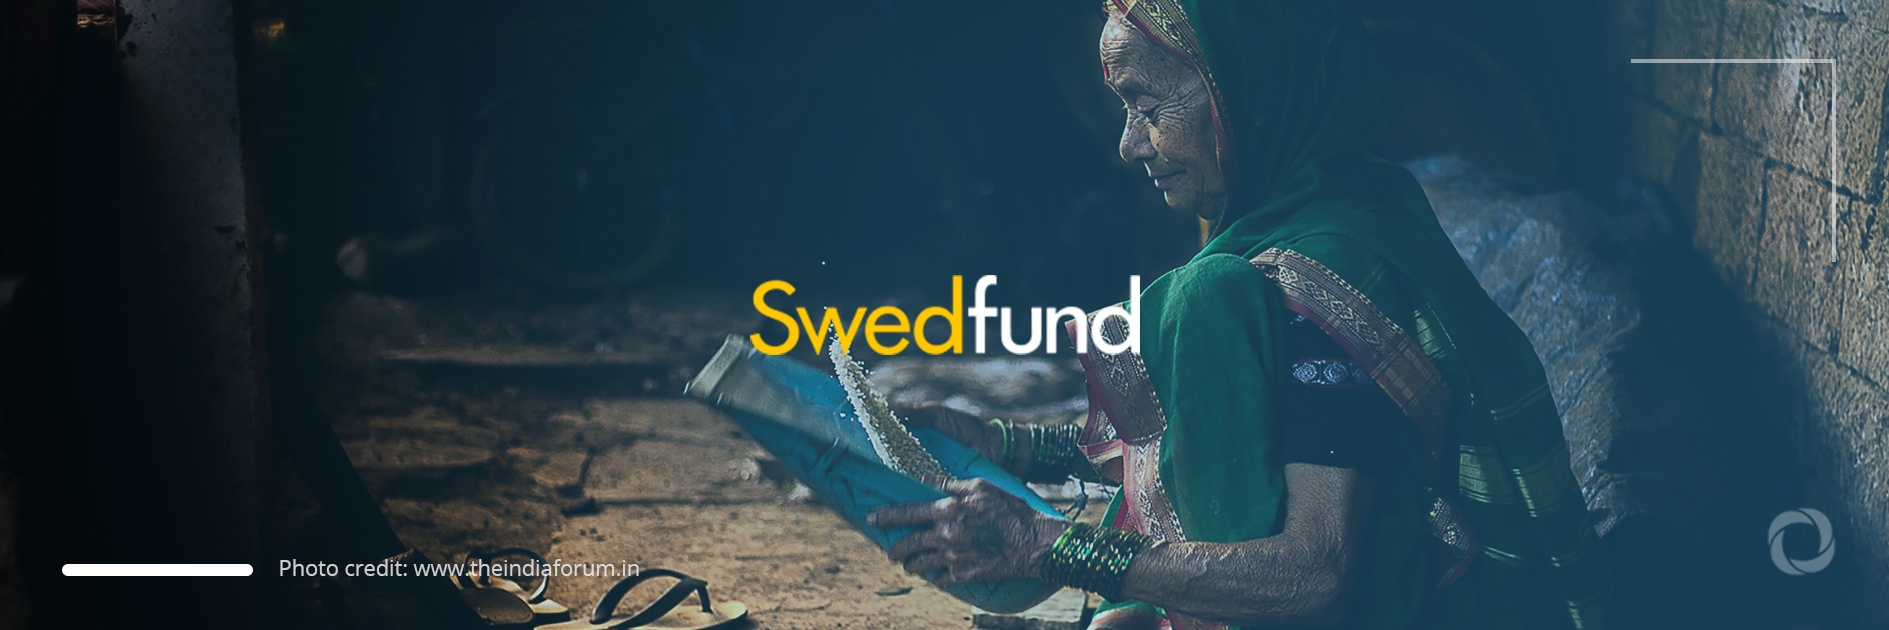 Swedish fund approves US$25 million to back Indian women’s economic empowerment